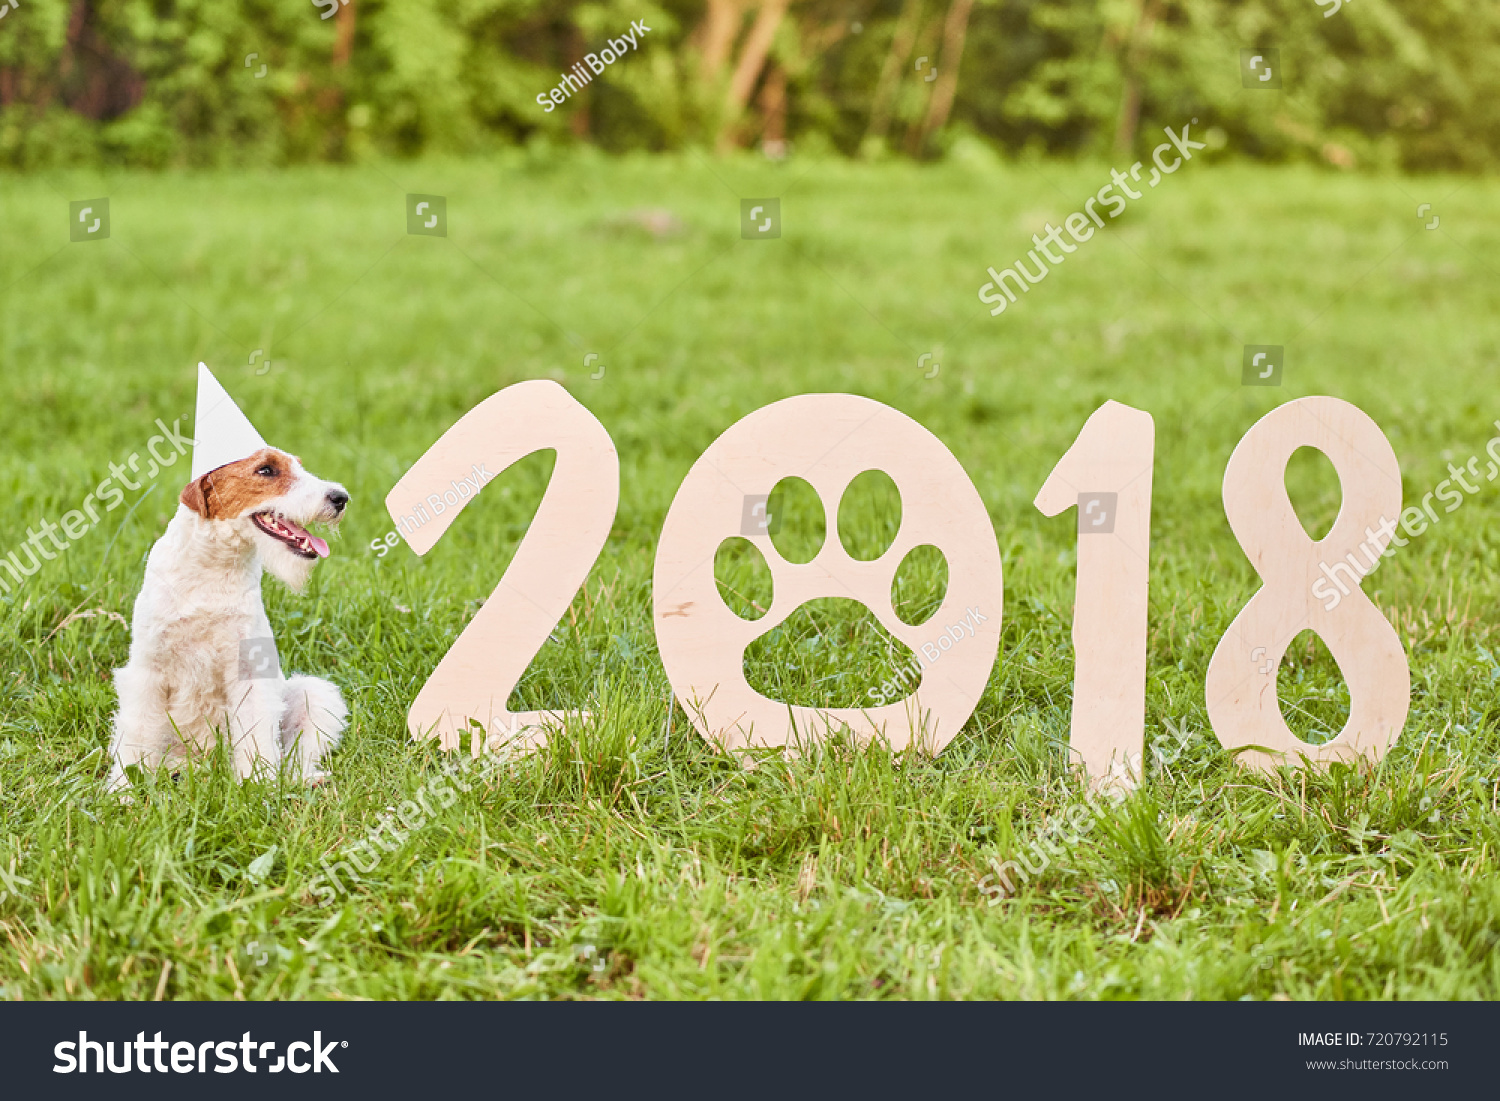 Shot of a happy young fox terrier puppy wearing party hat sitting next to 2018 wooden sing new year celebration festive greeting card nature outdoors concept.  #720792115